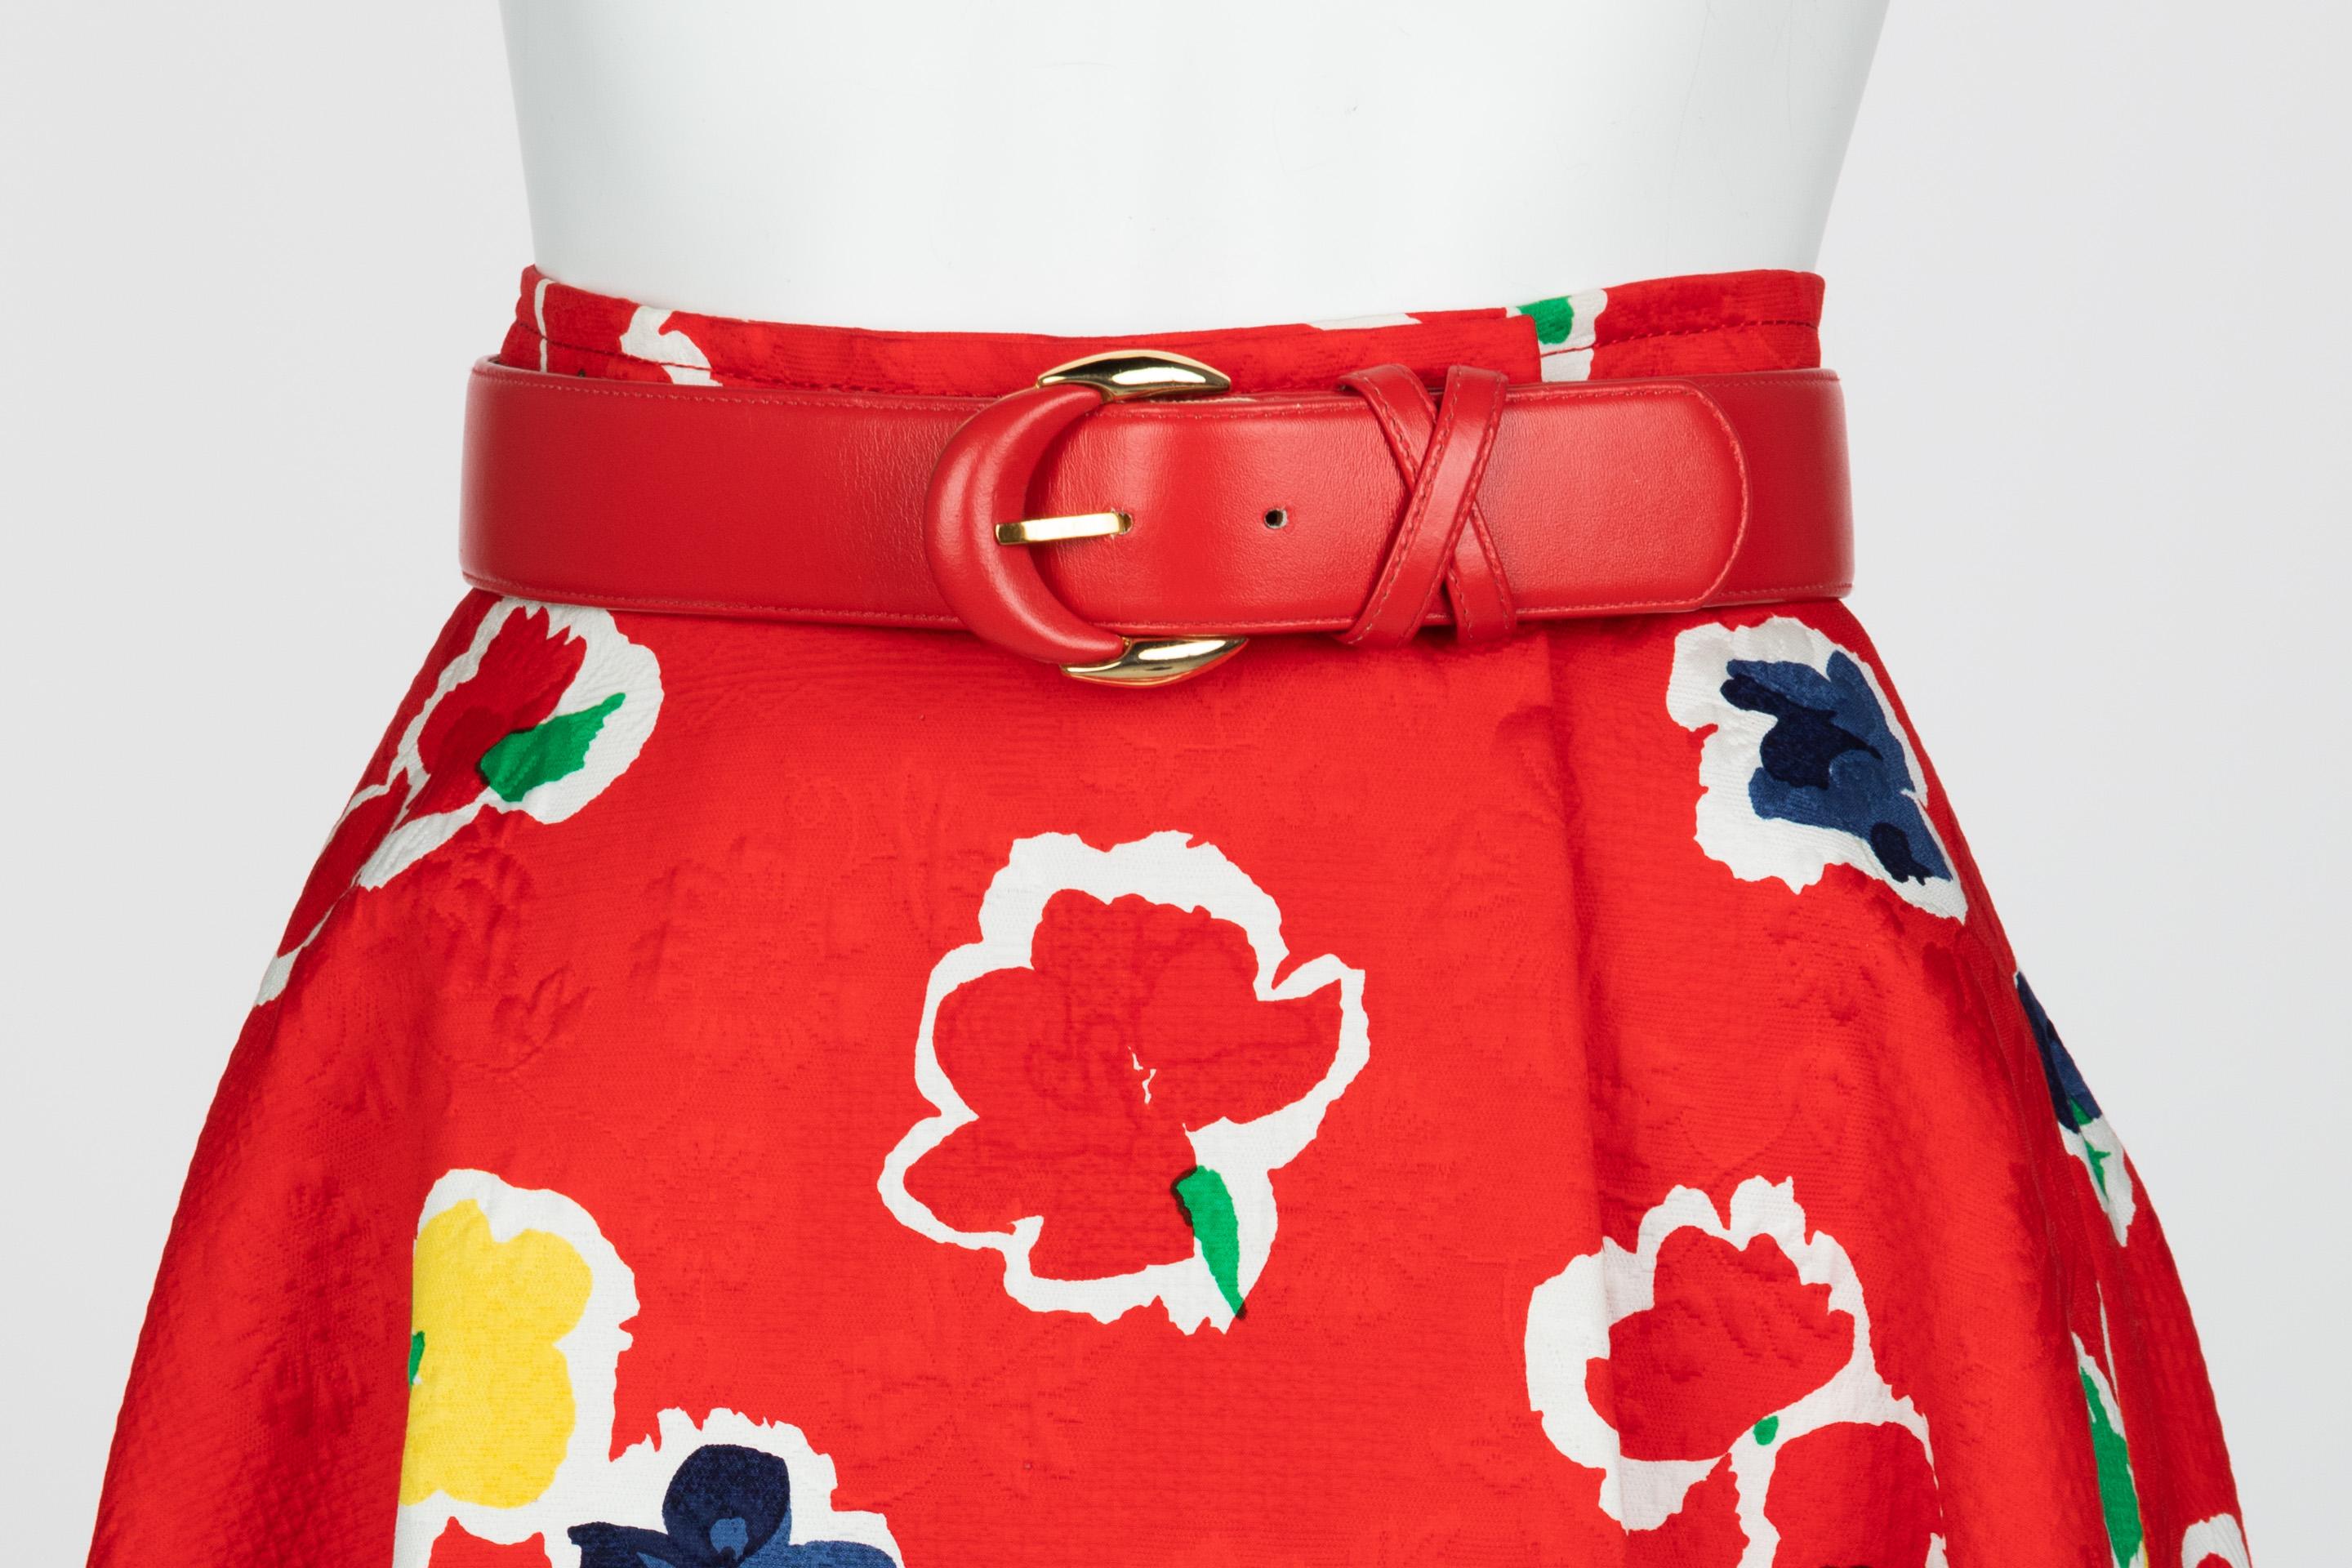 Galanos Red Floral Cotton Wrap Skirt w/ Belt, 1980s In Excellent Condition For Sale In Boca Raton, FL